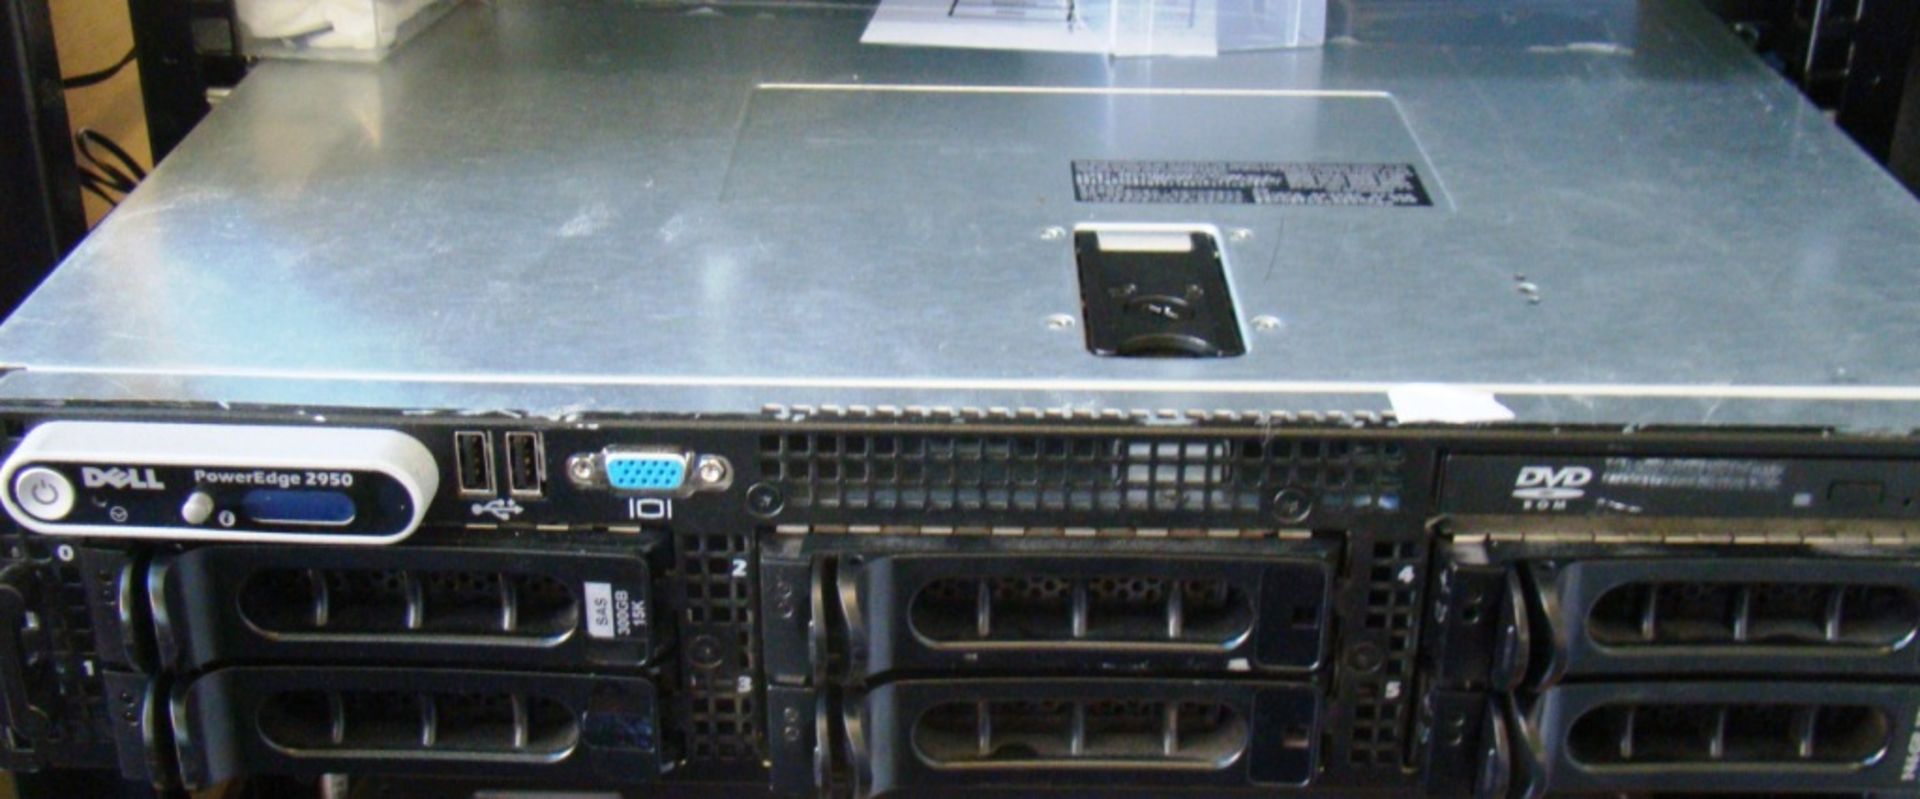 Dell 2950 PowerEdge 2 * 2.66Ghz Quad Core 1333Mhz , 22GB 667 Mhz Memory, 1 * 67Gb HDD, 1 * - Image 8 of 9